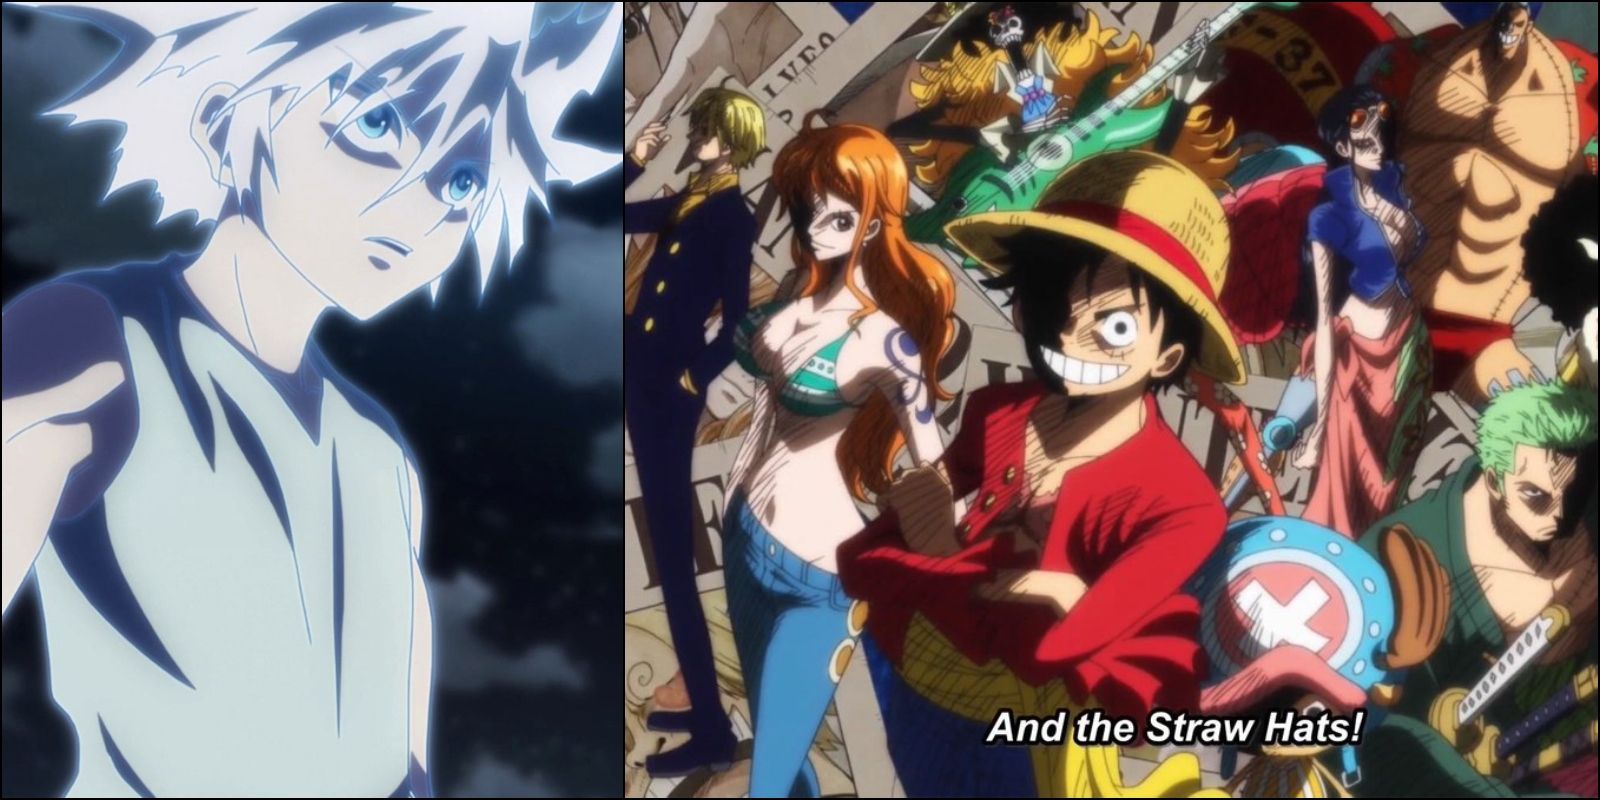 Which manga is better: Hunter x Hunter or One Piece? - Quora